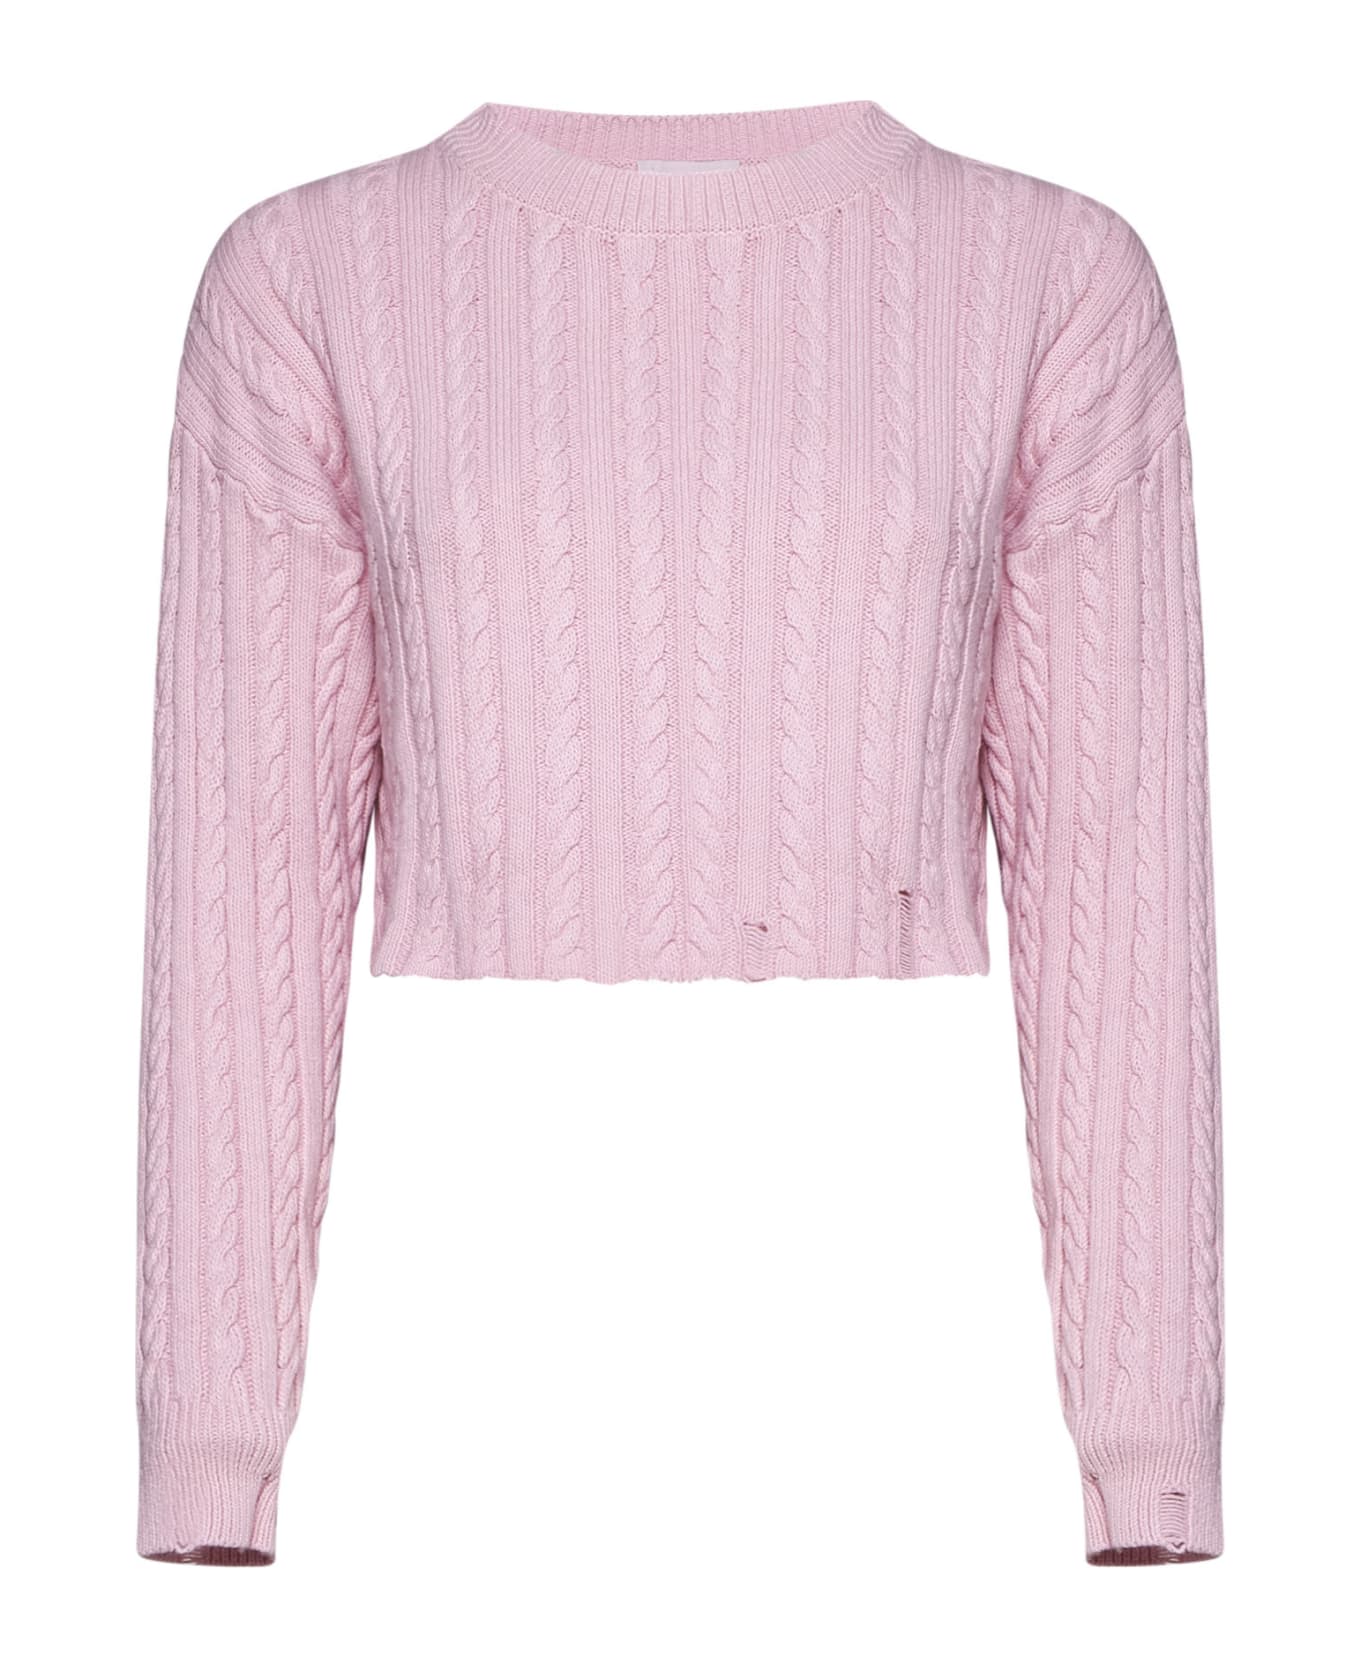 Hope Sweater - Pink